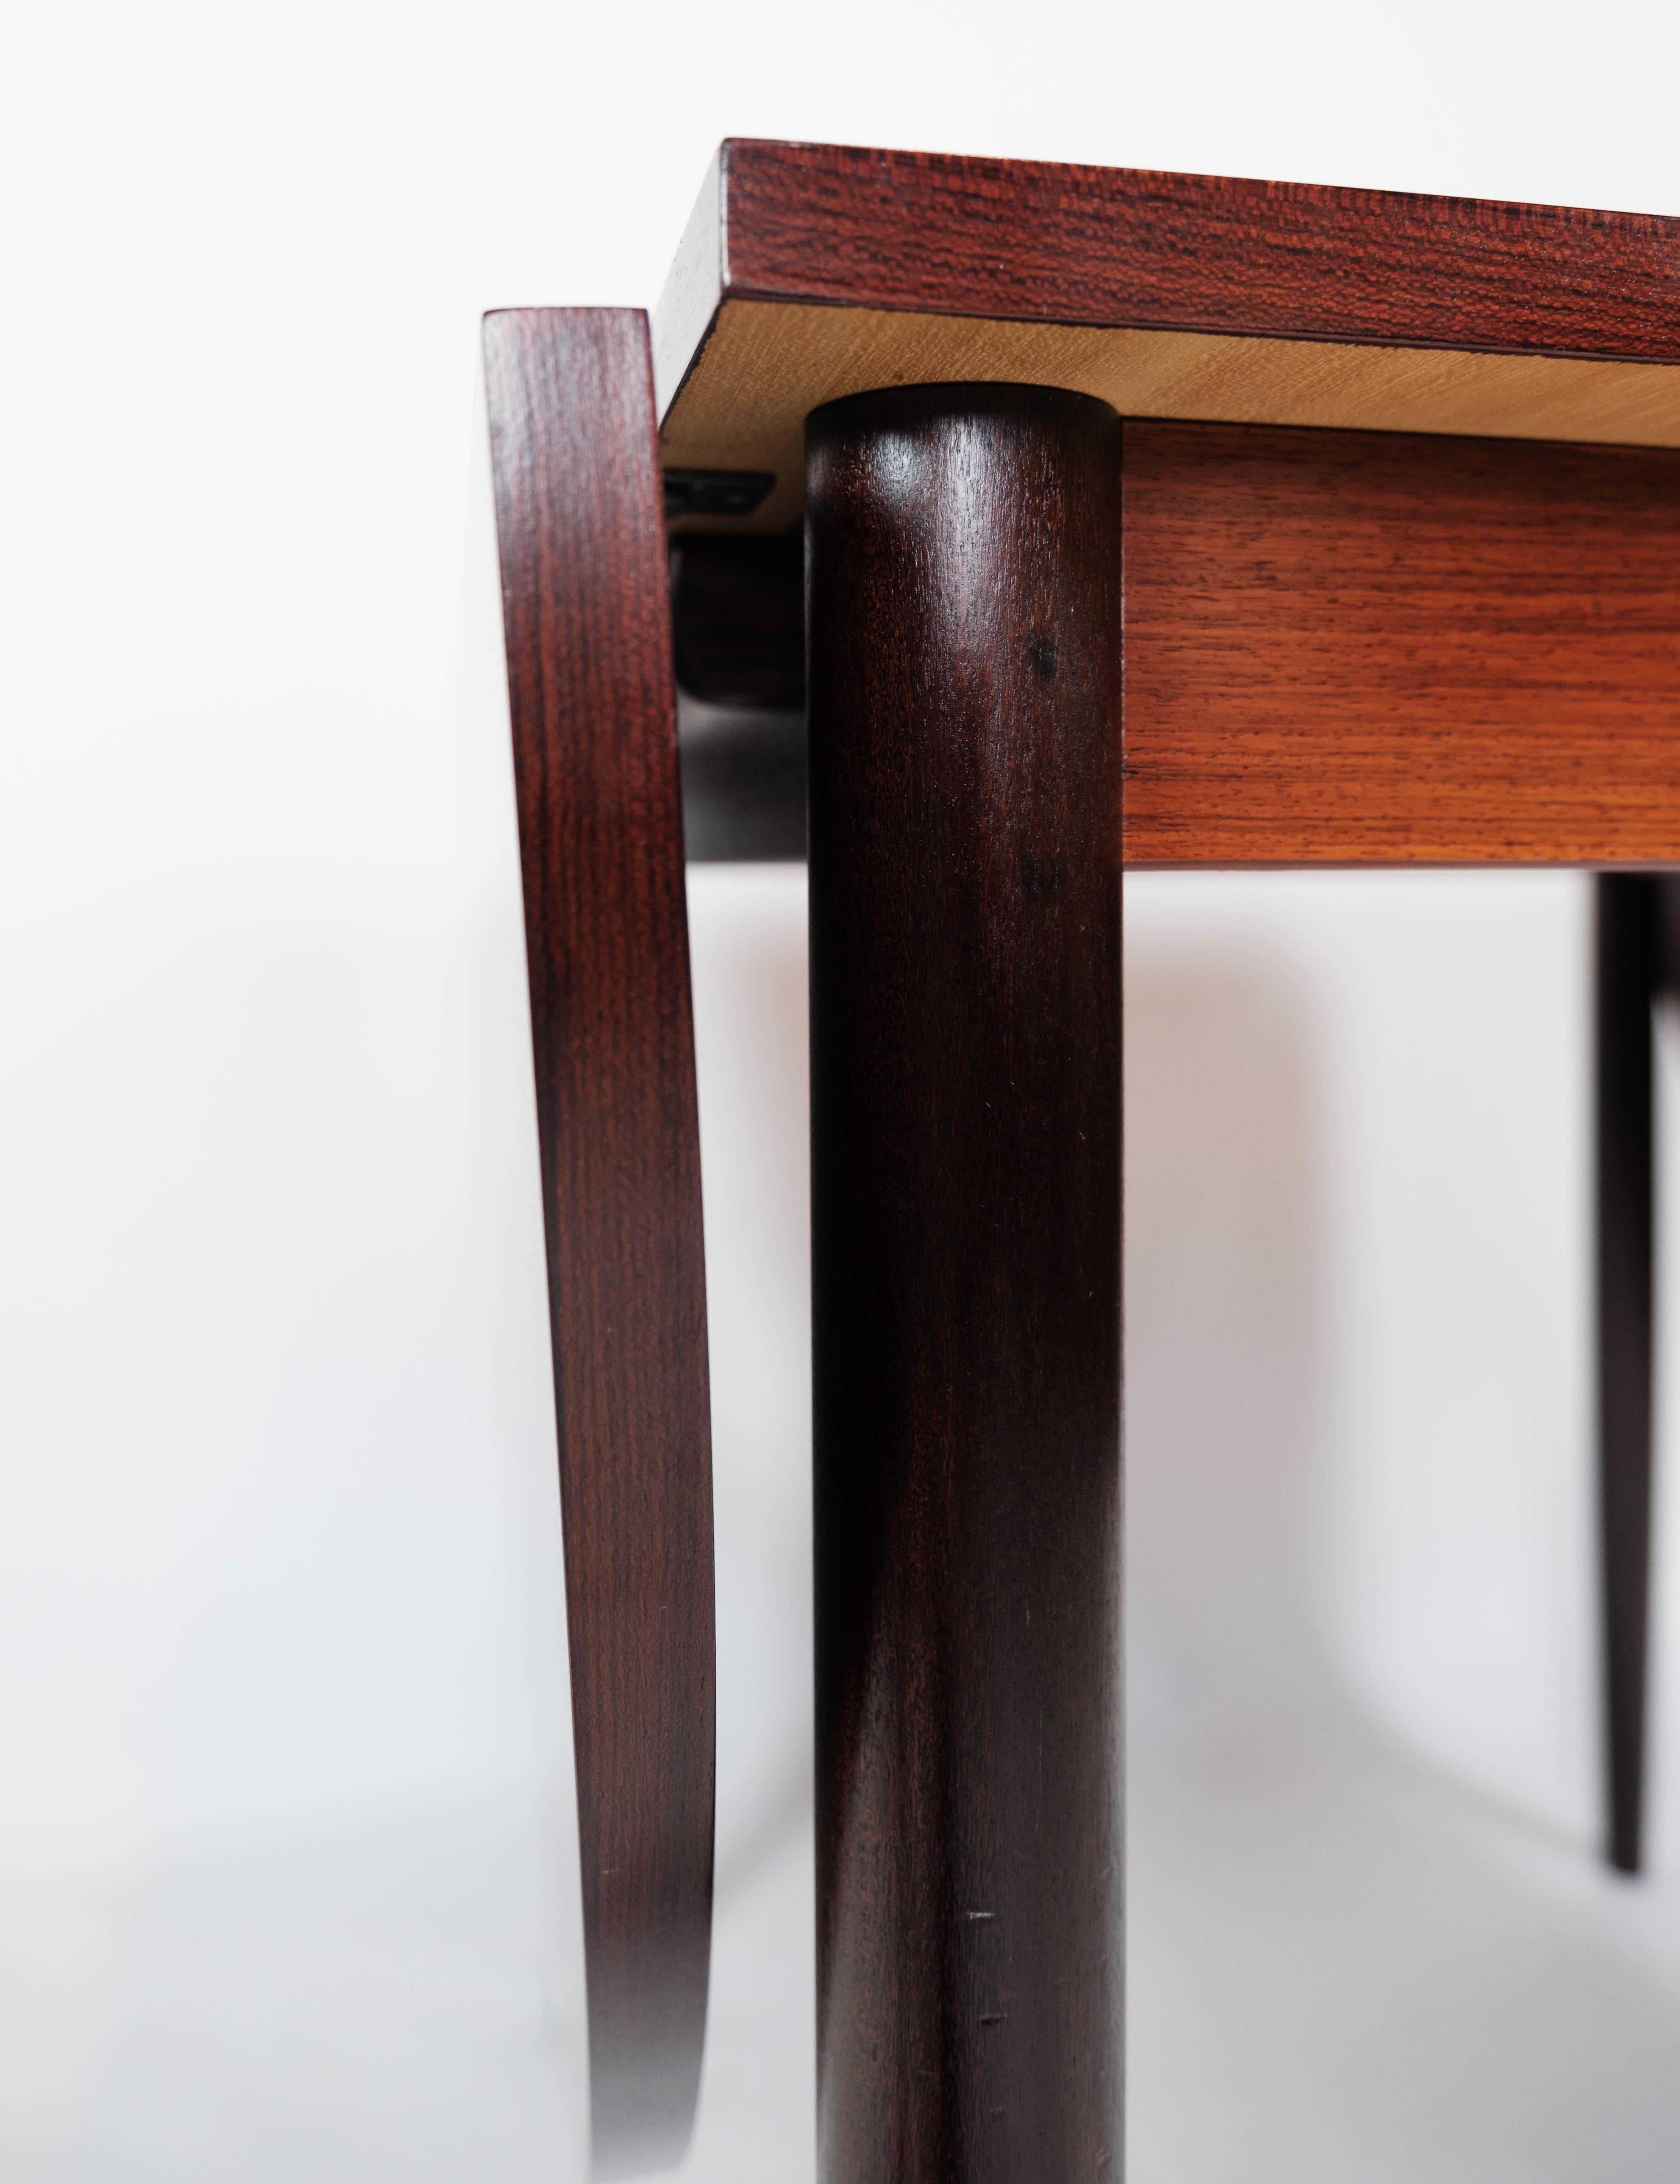 This exquisite dining table, designed by the renowned Arne Vodder in the 1960s, exemplifies the elegance and craftsmanship of Danish design. Crafted from luxurious rosewood, the table exudes sophistication and timeless allure.

Featuring convenient